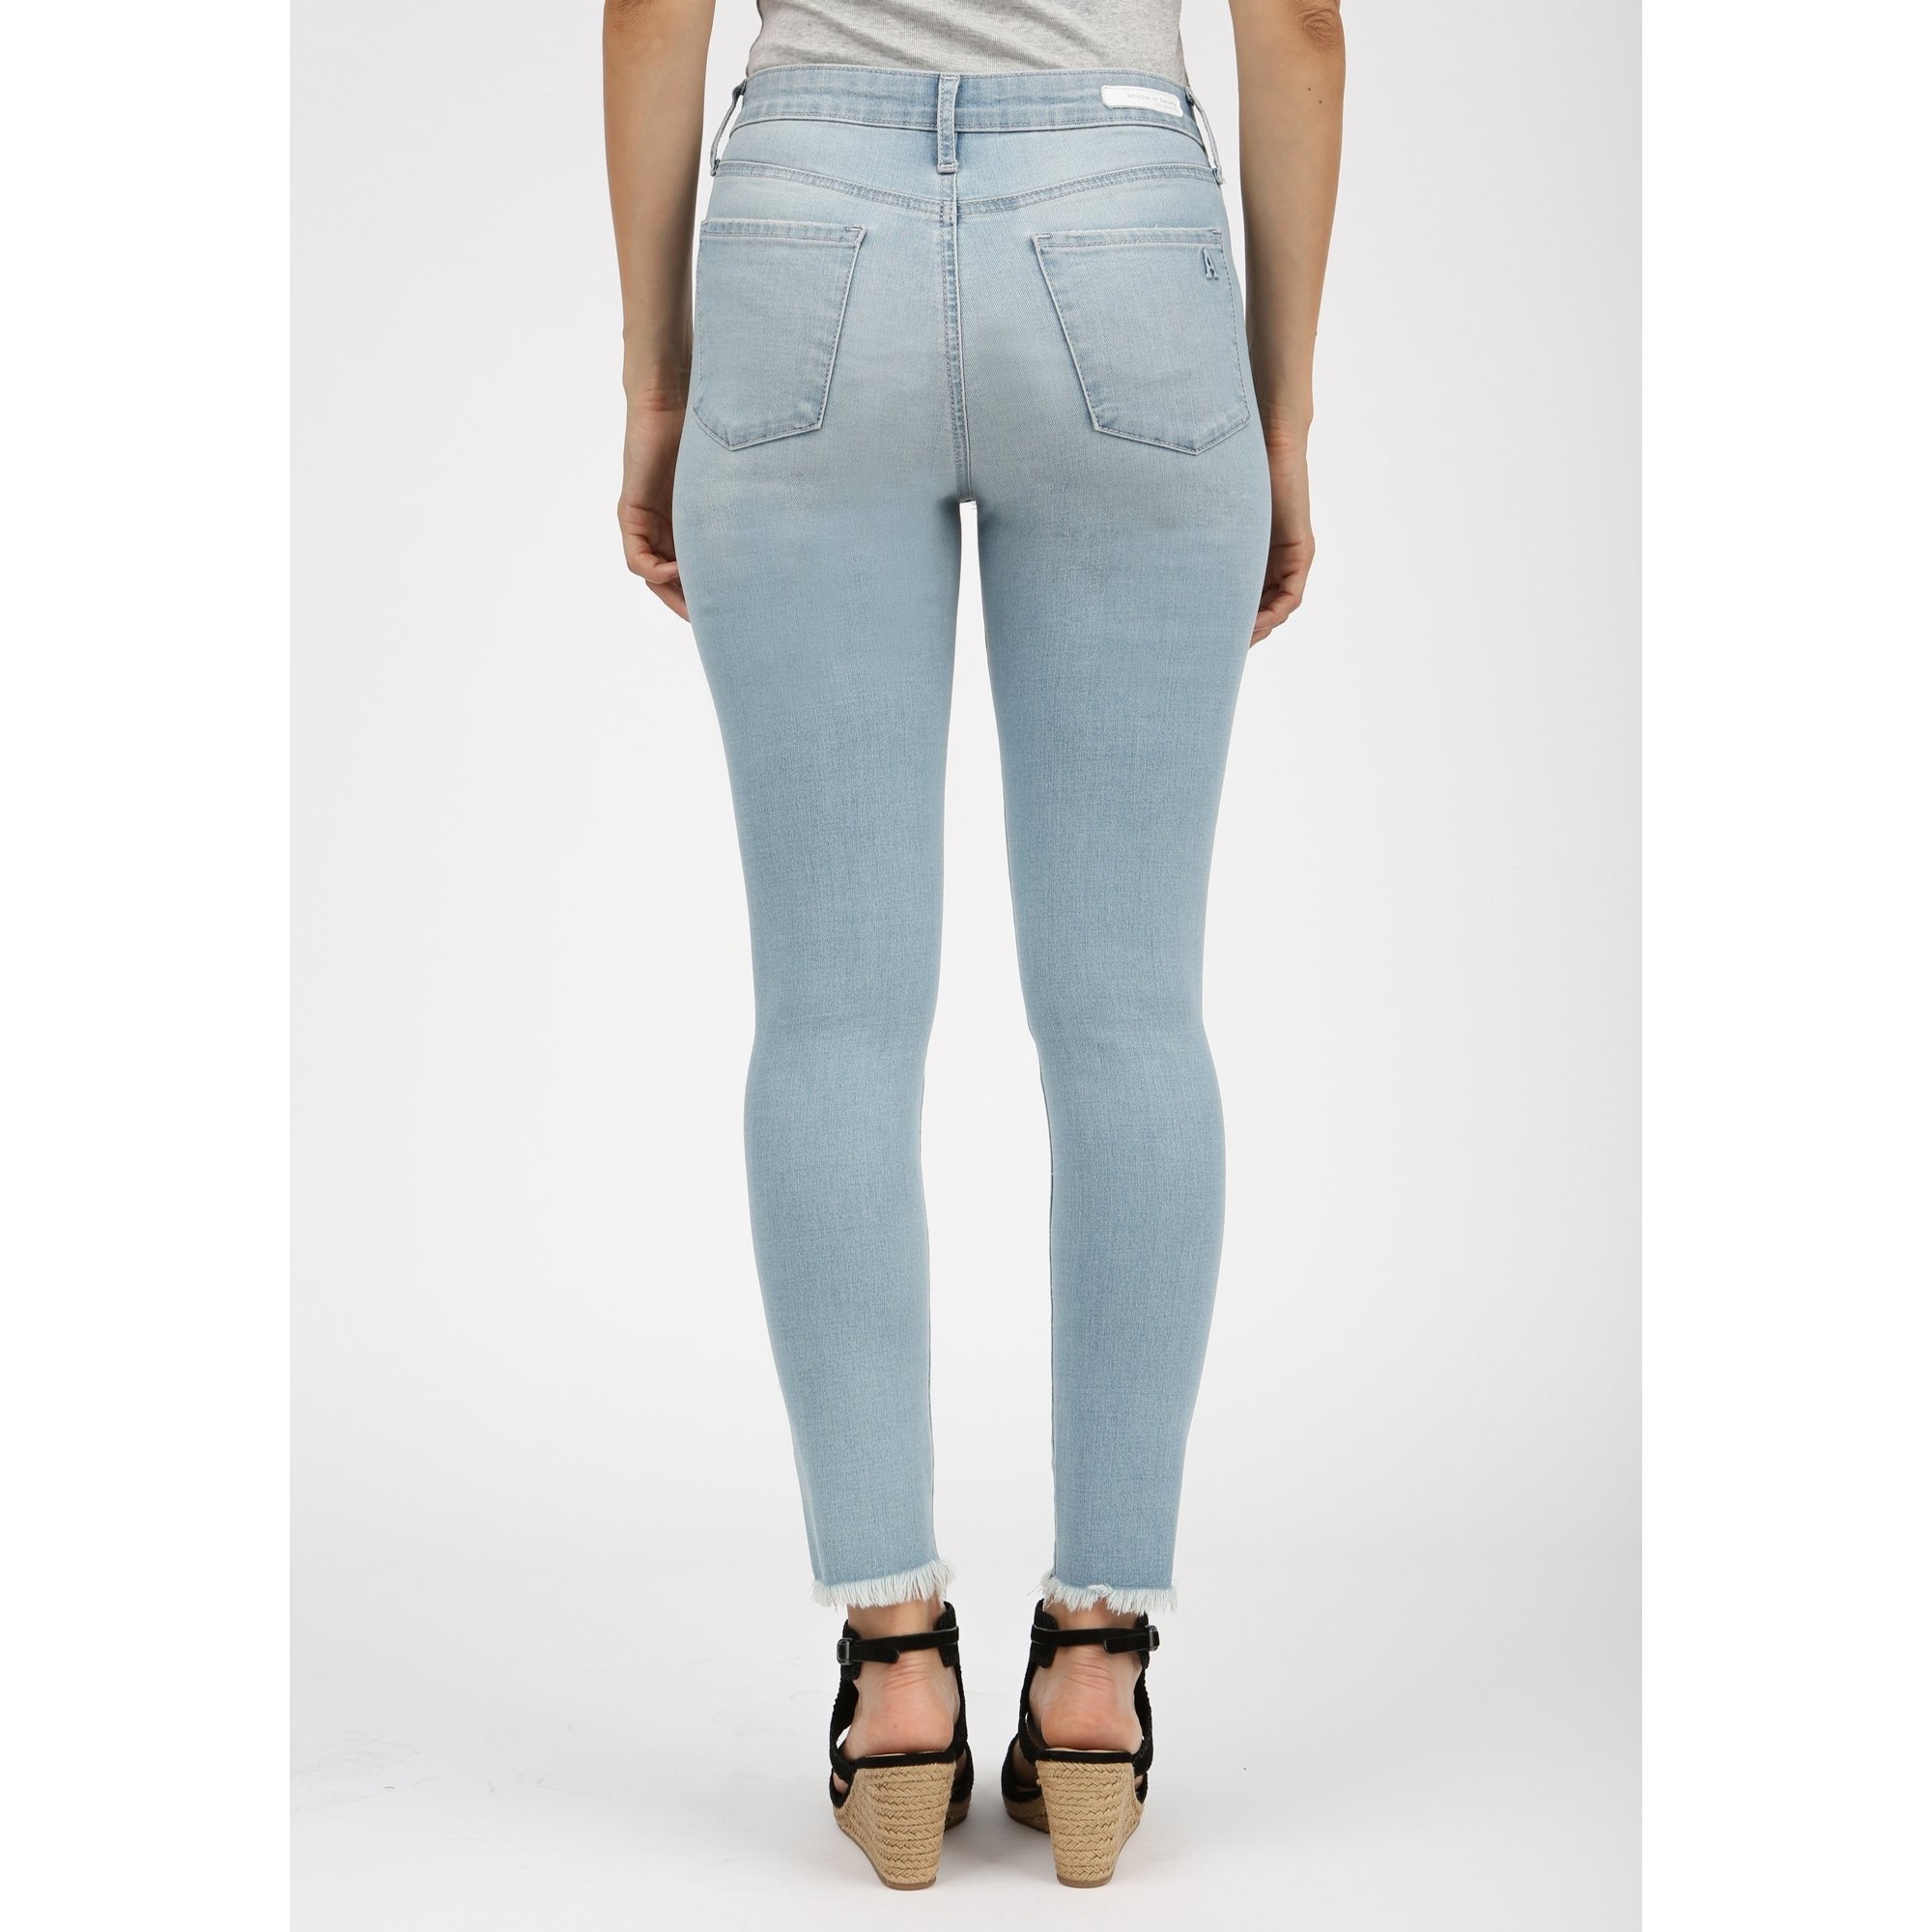 Articles of society heather cut off hem Bottoms jeans at Luxeden 1